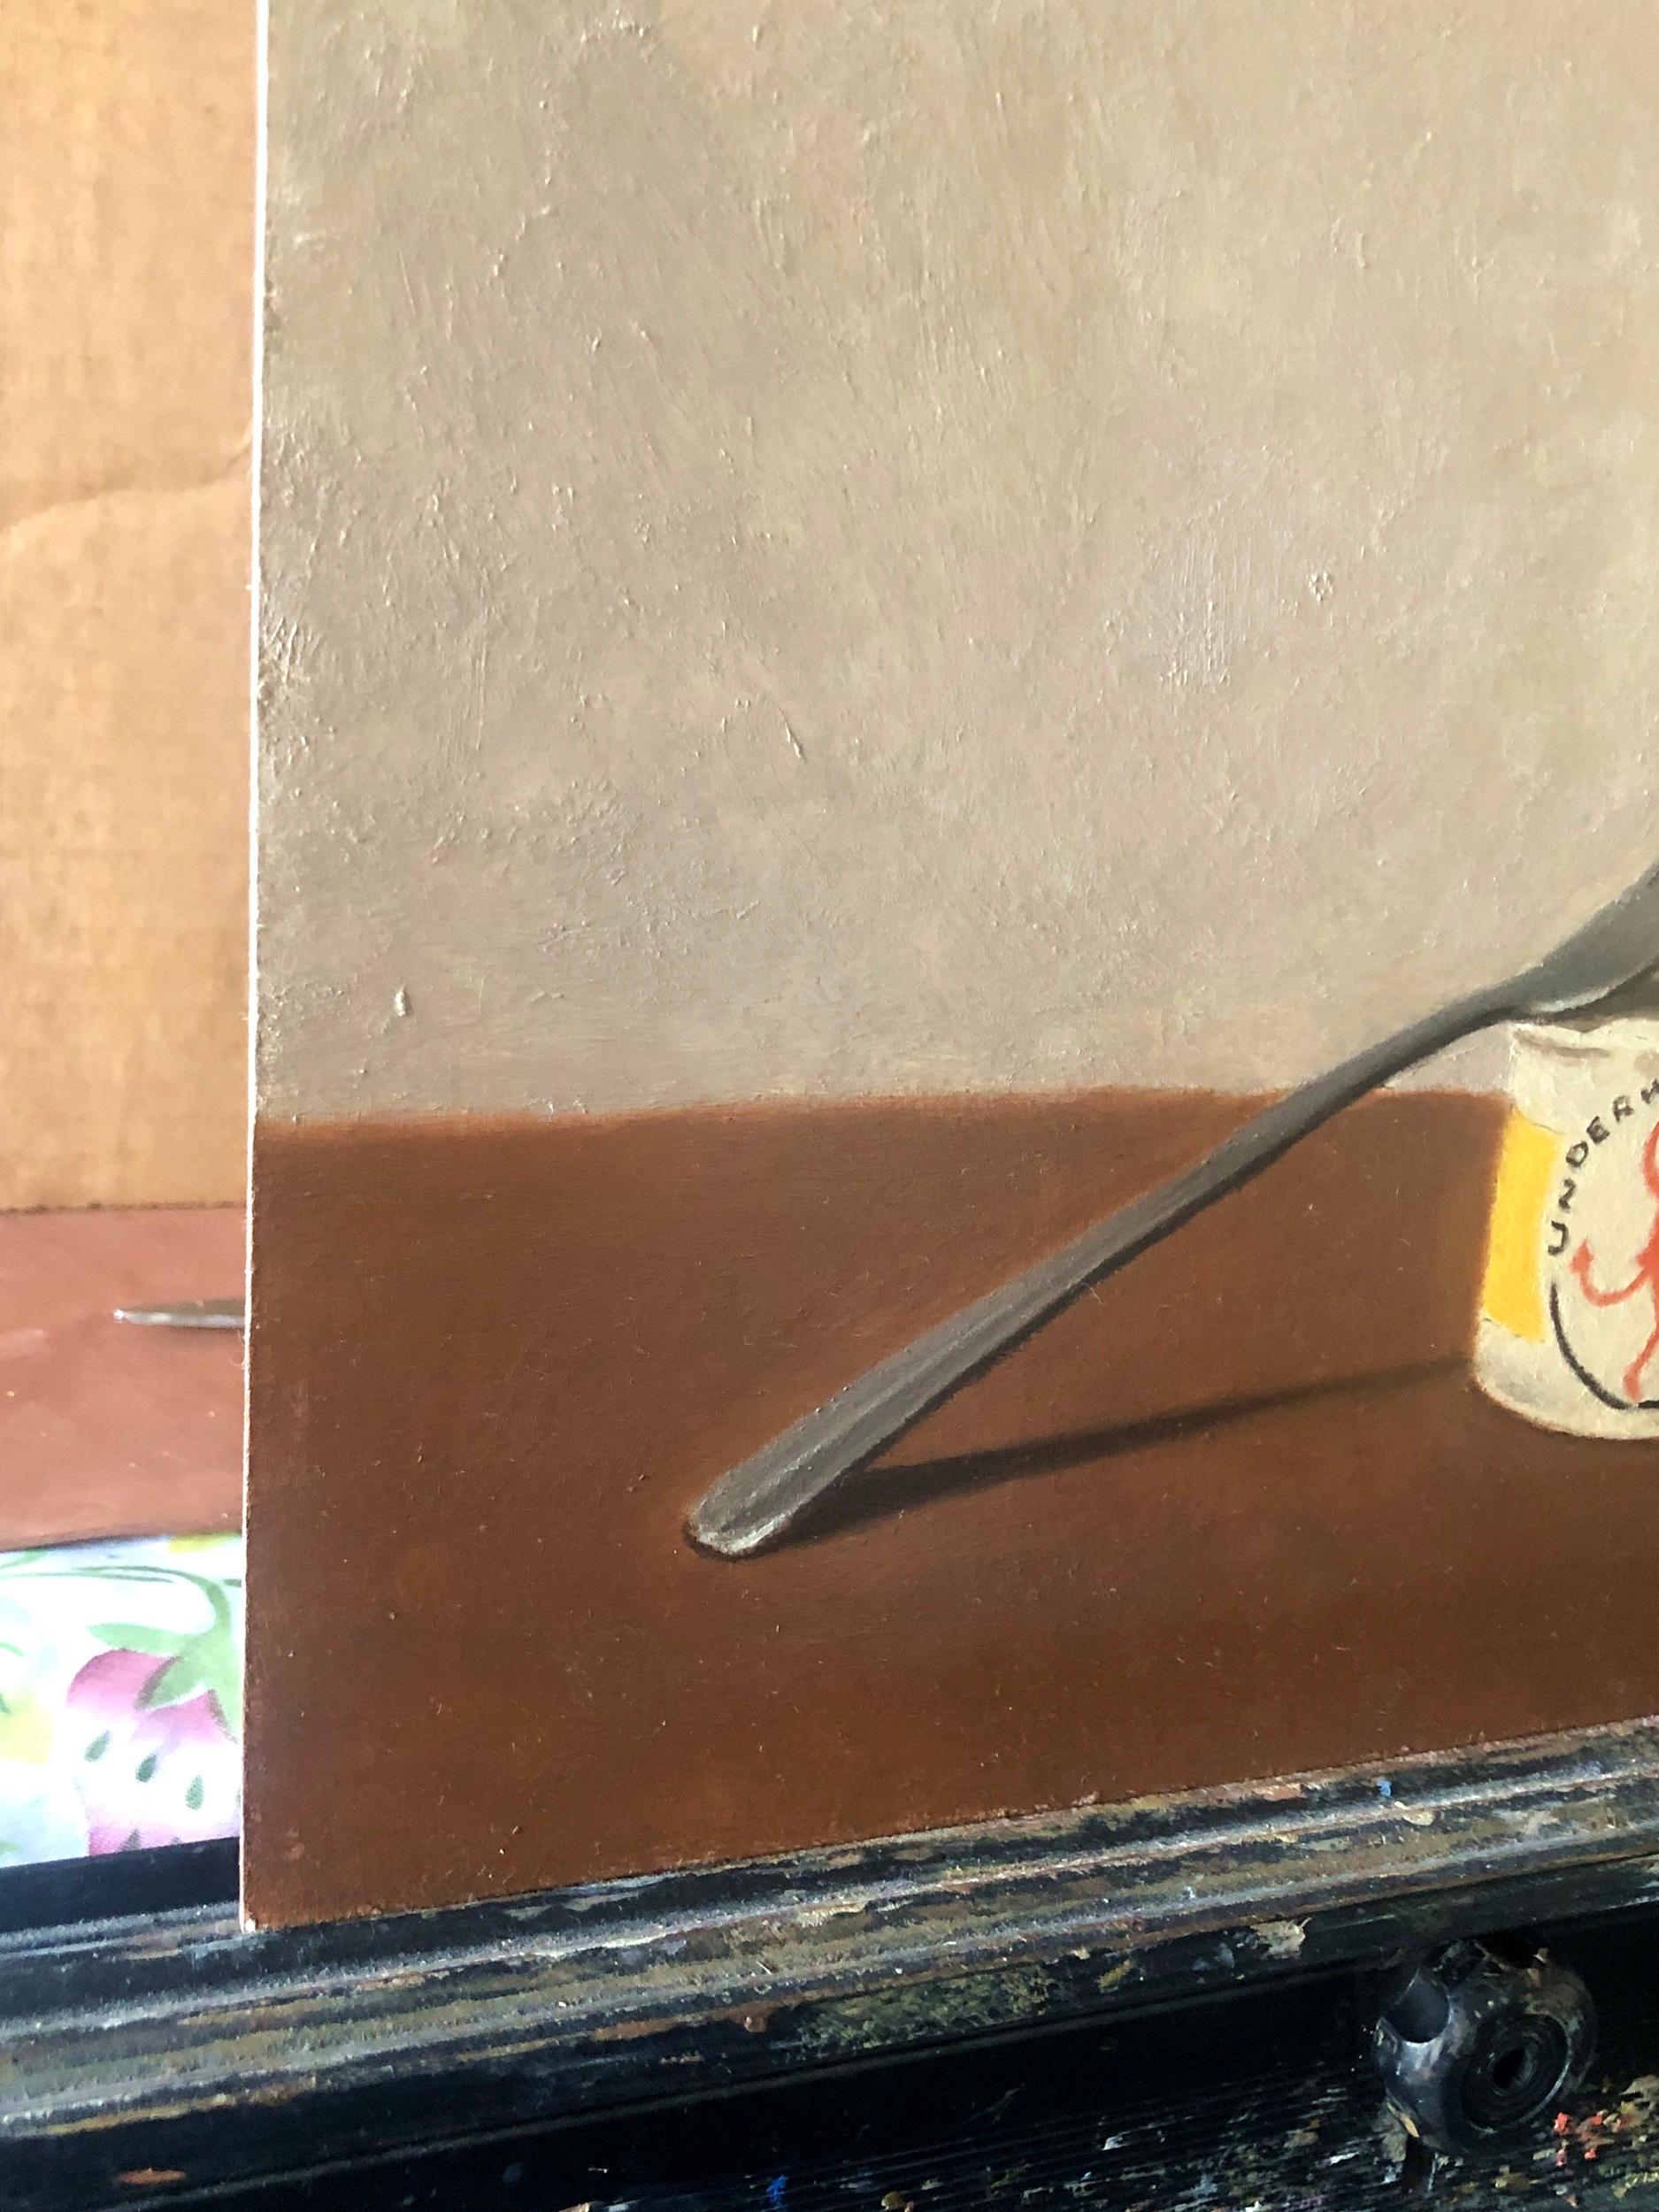 <p>Artist Comments<br />Artist Jose H. Alvarenga displays a fork, a canned good, and habanero sauce in a vintage still life setup. 